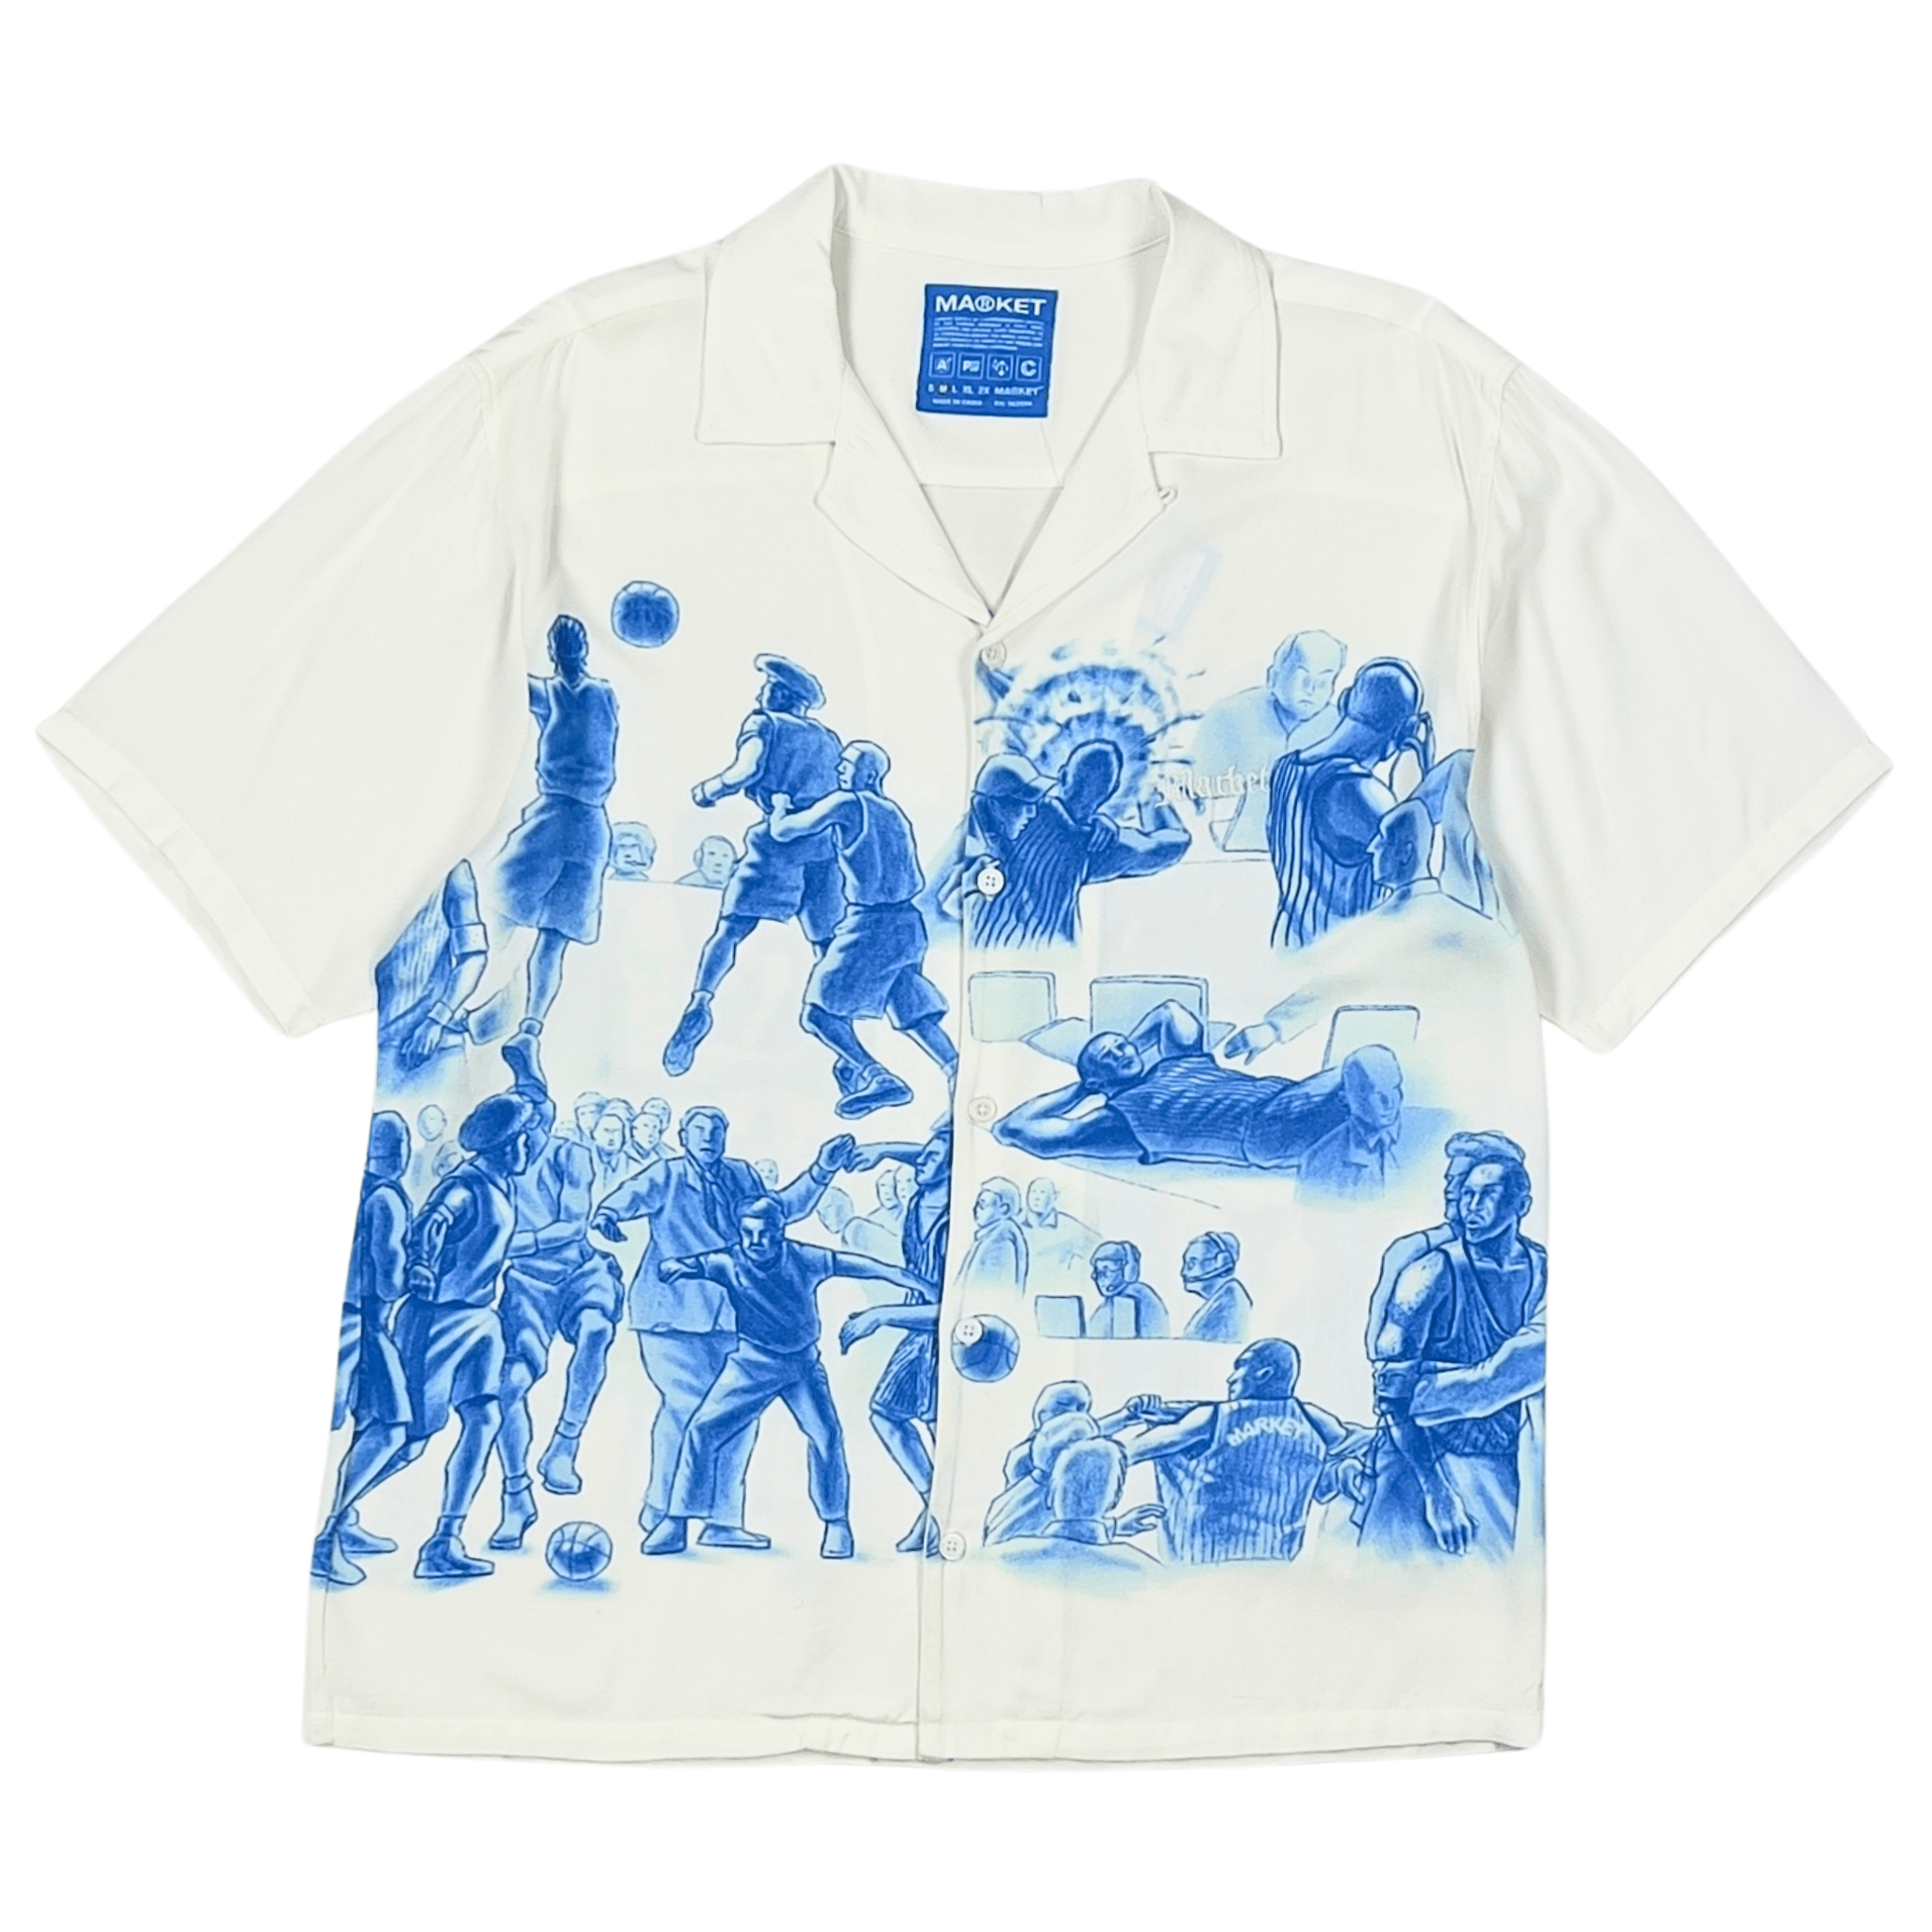 Malice Palace Camp Shirt in white and blue